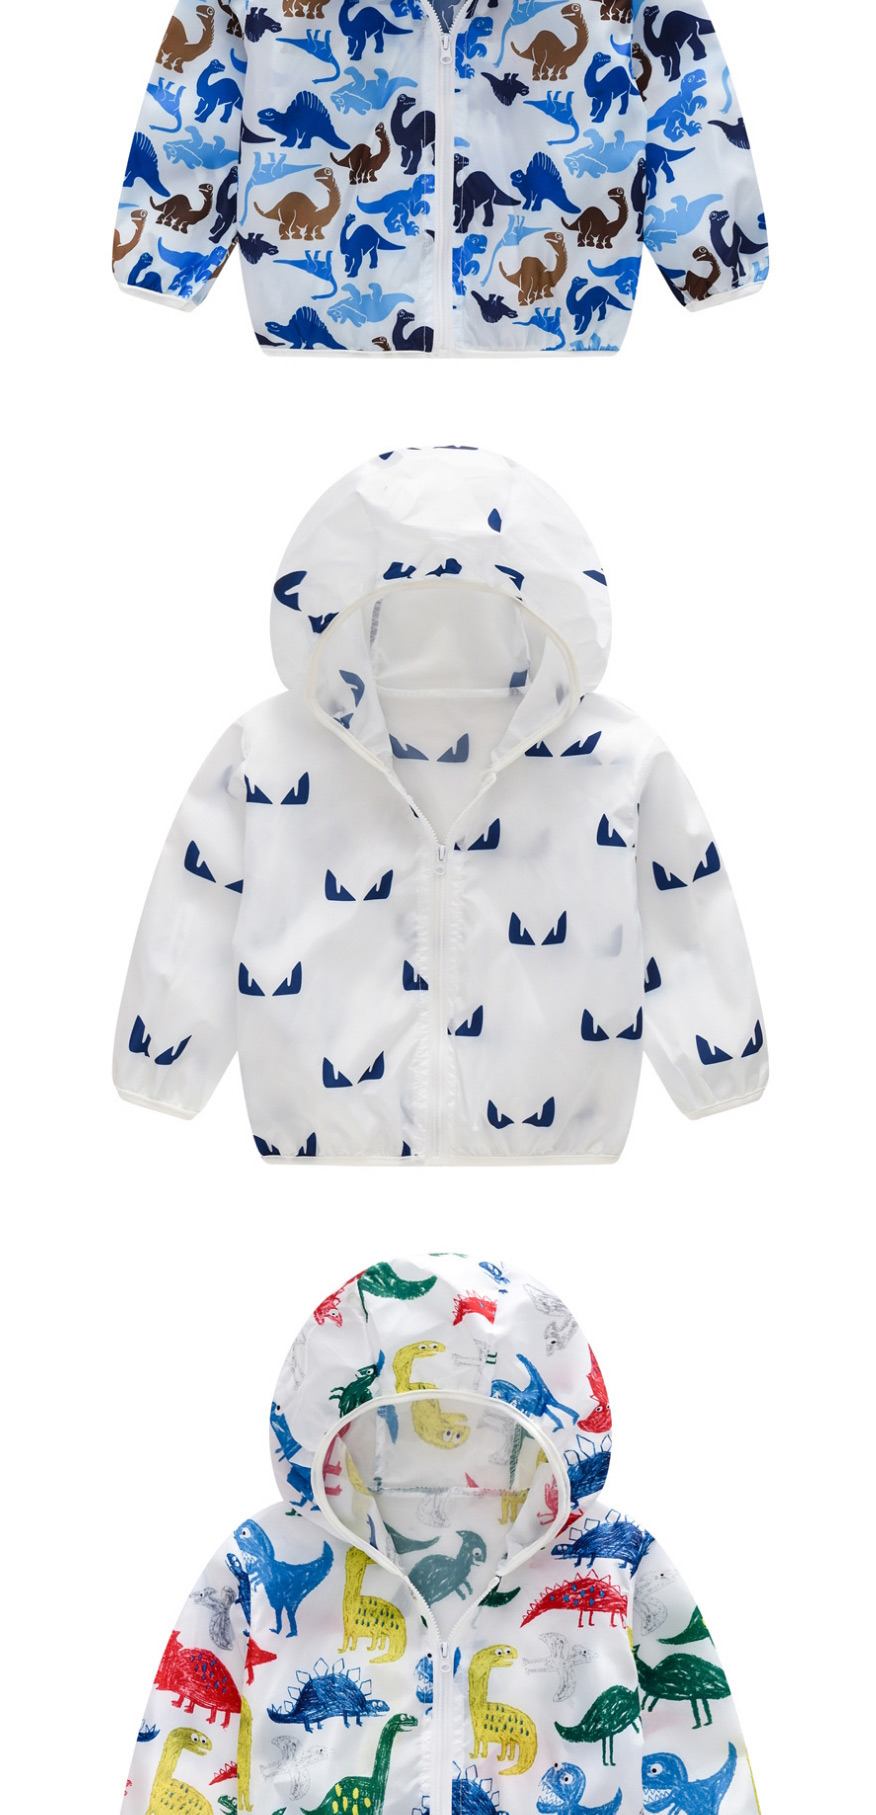 Fashion Love Hooded Outdoor Sun Protection Clothing,Kids Clothing